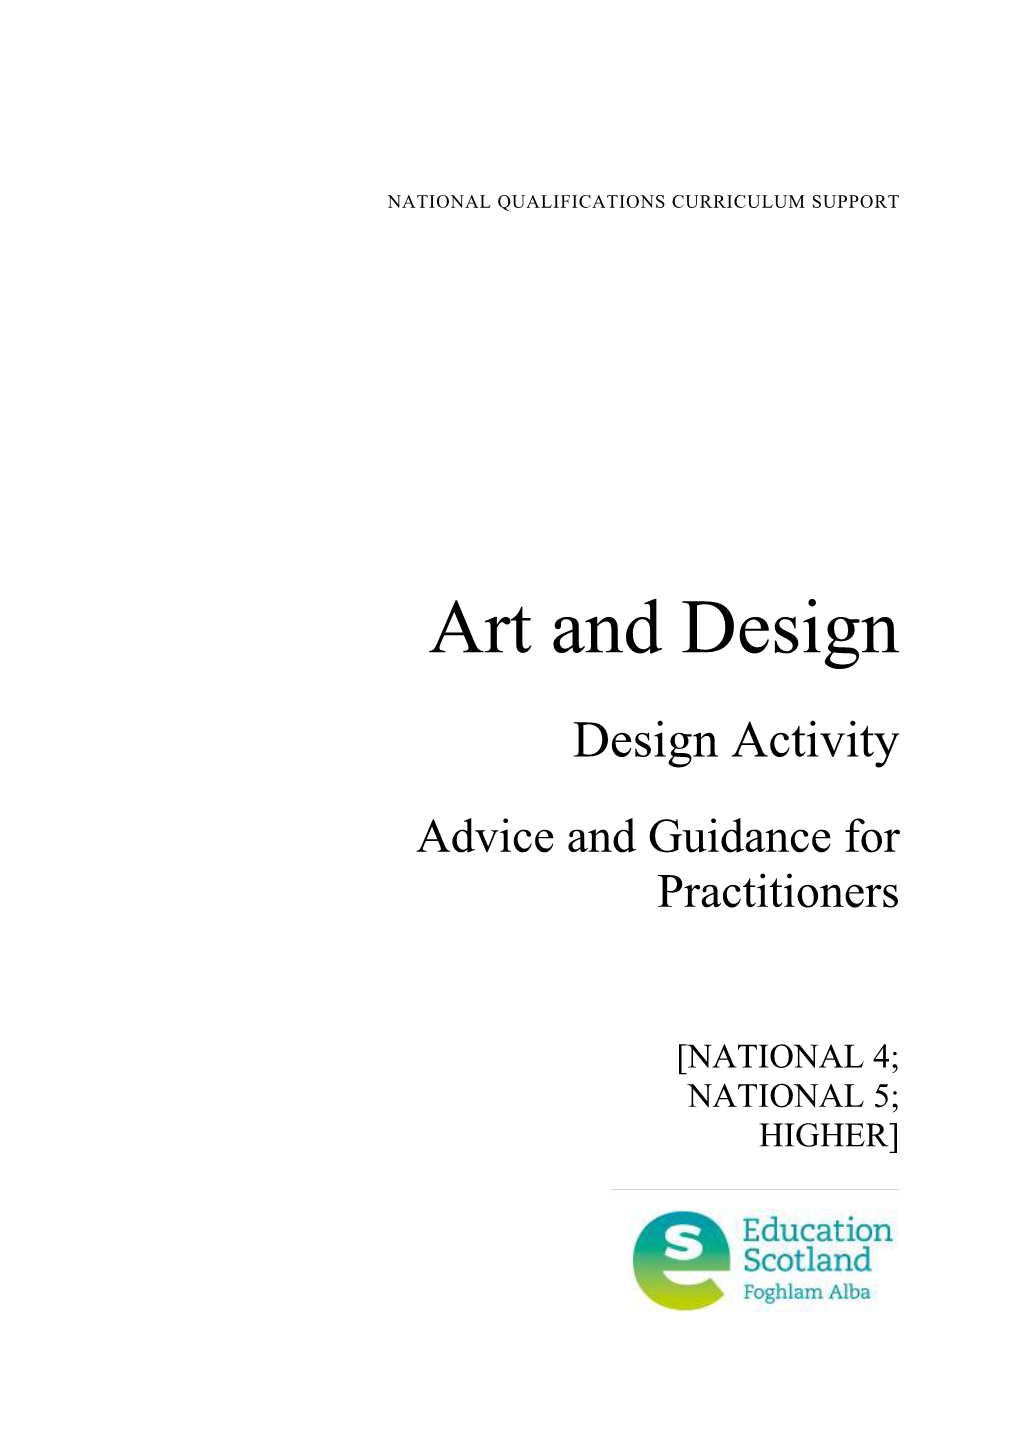 Art and Design: Design Activity, Advice and Guidance for Practitioners